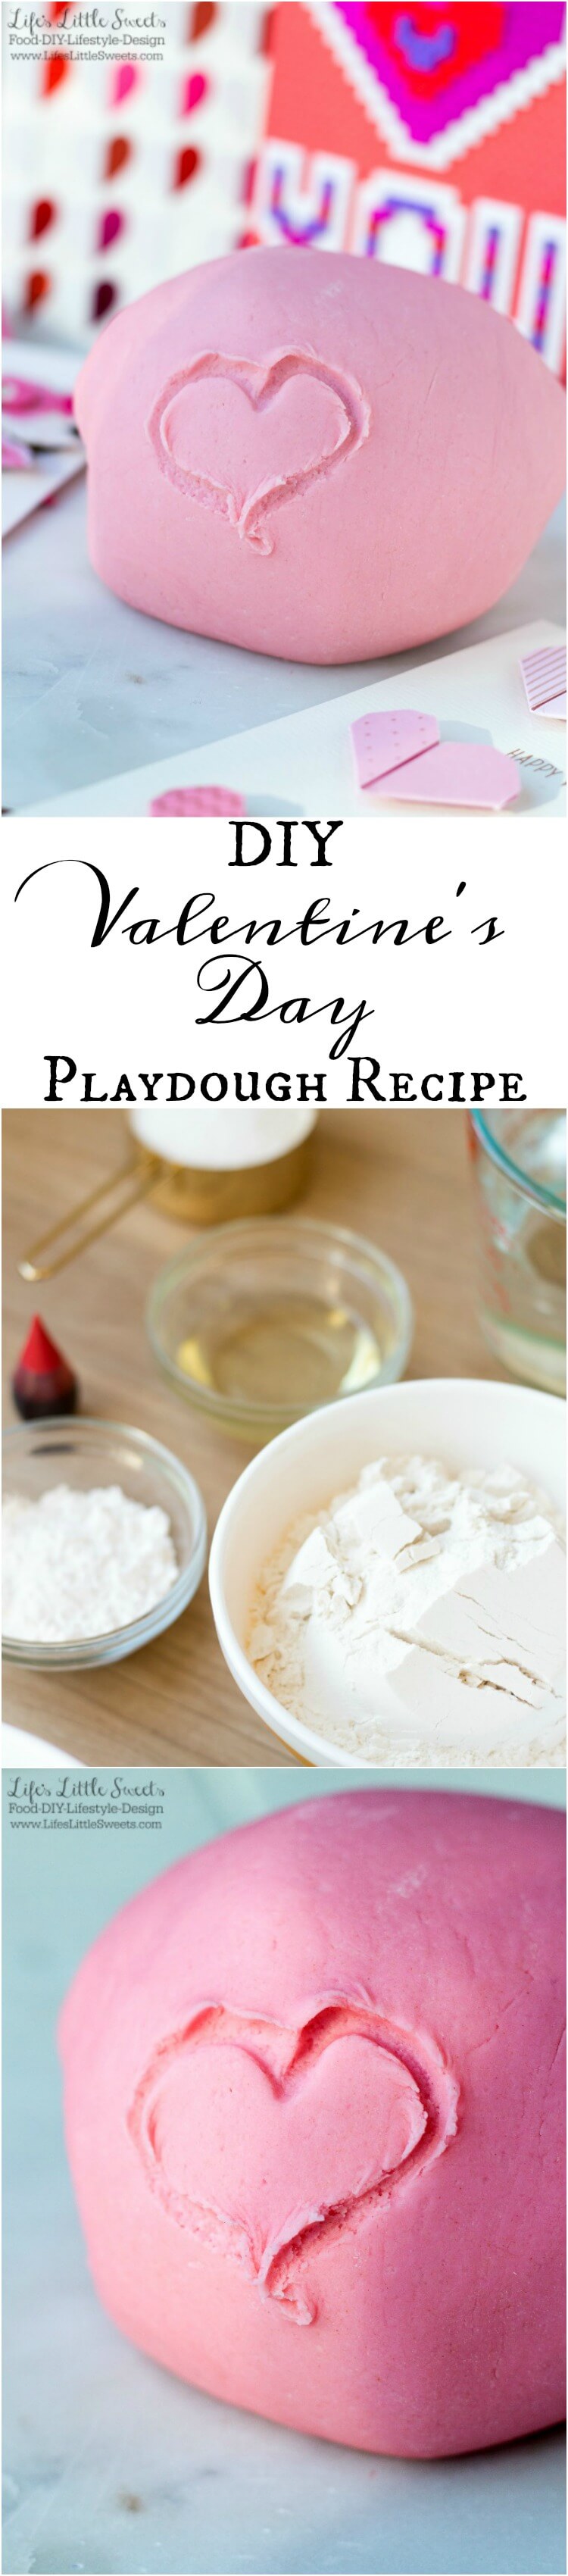 This DIY Valentine's Day Playdough Recipe is an easy kids activity that you can do for a classroom or teacher's gift for Valentine's Day along with Hallmark Signature Valentine's Day Cards. It only takes only a few minutes, 5 ingredients (minimum) to make and lasts for months! (makes about 1 lb. 11.6 ounces) #SendingYourLove #CollectiveBias #ad @Walmart #playdough #diy #kidsactivities #pink